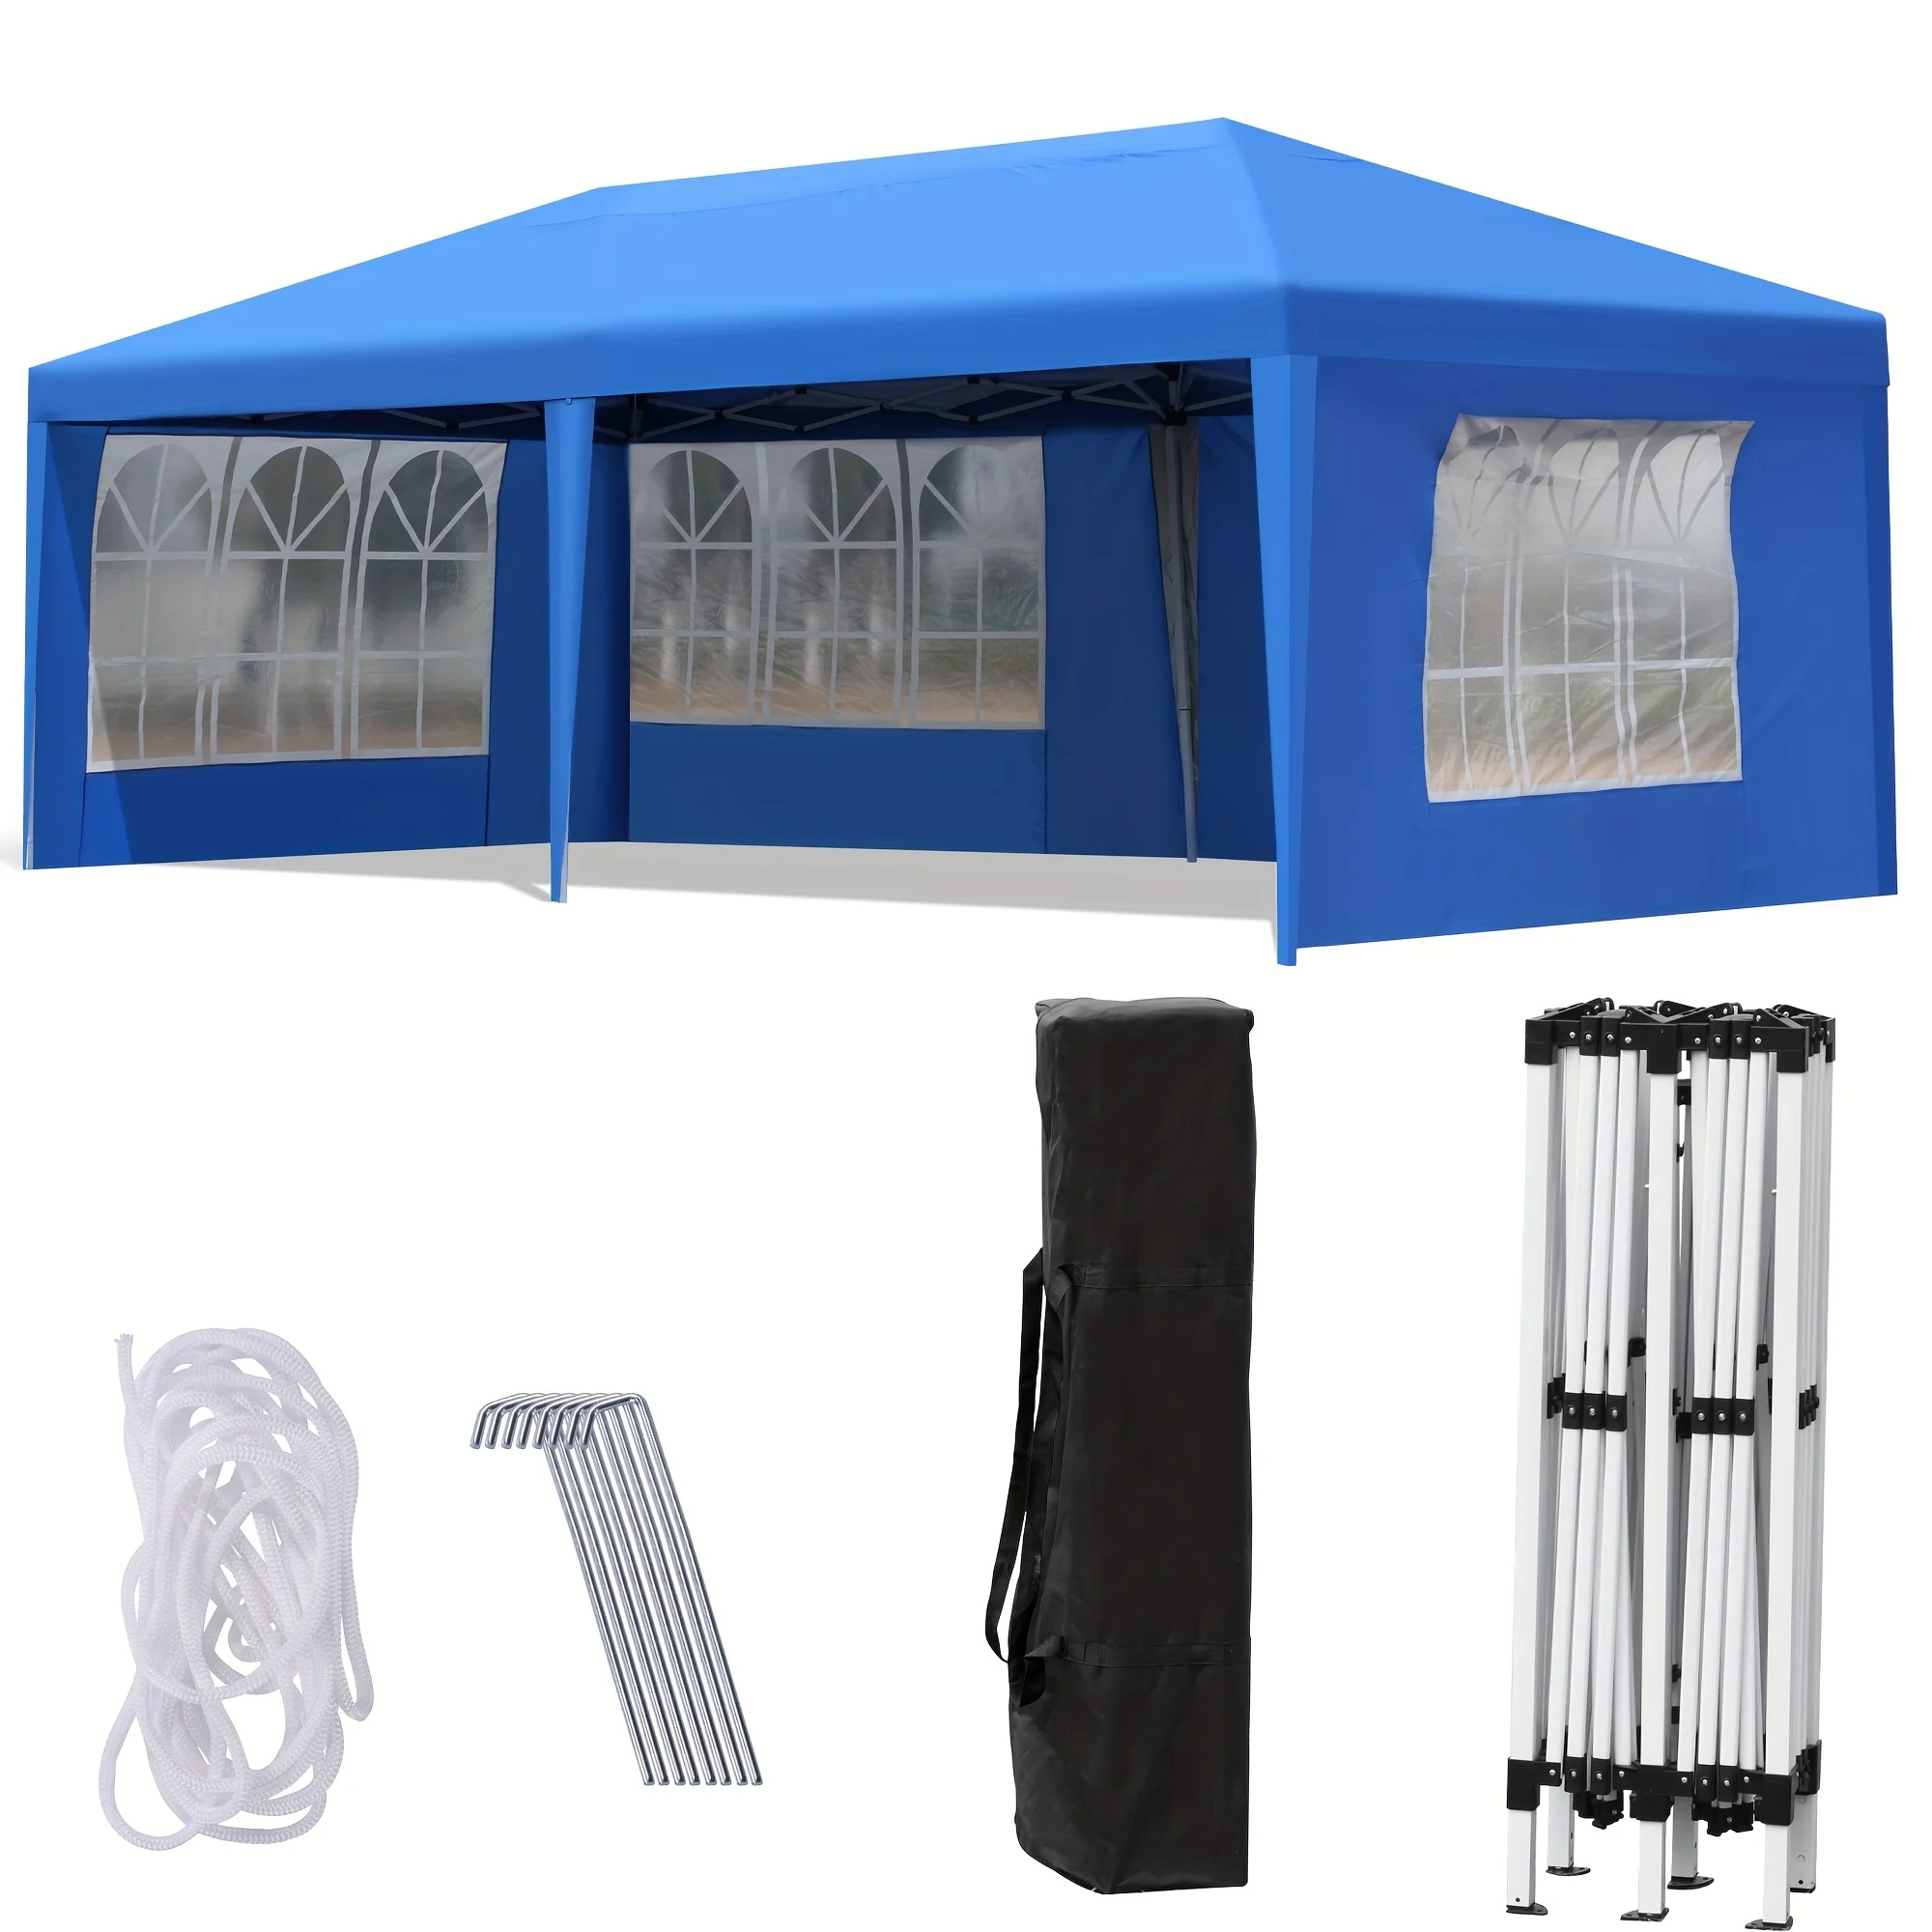 

10'X20' Tent Pop-up Canopy Commercial Tent With 6 Removable Sidewalls Tents For Parties With 12pcs Stakes, 6pcs Ropes Outdoor Ca